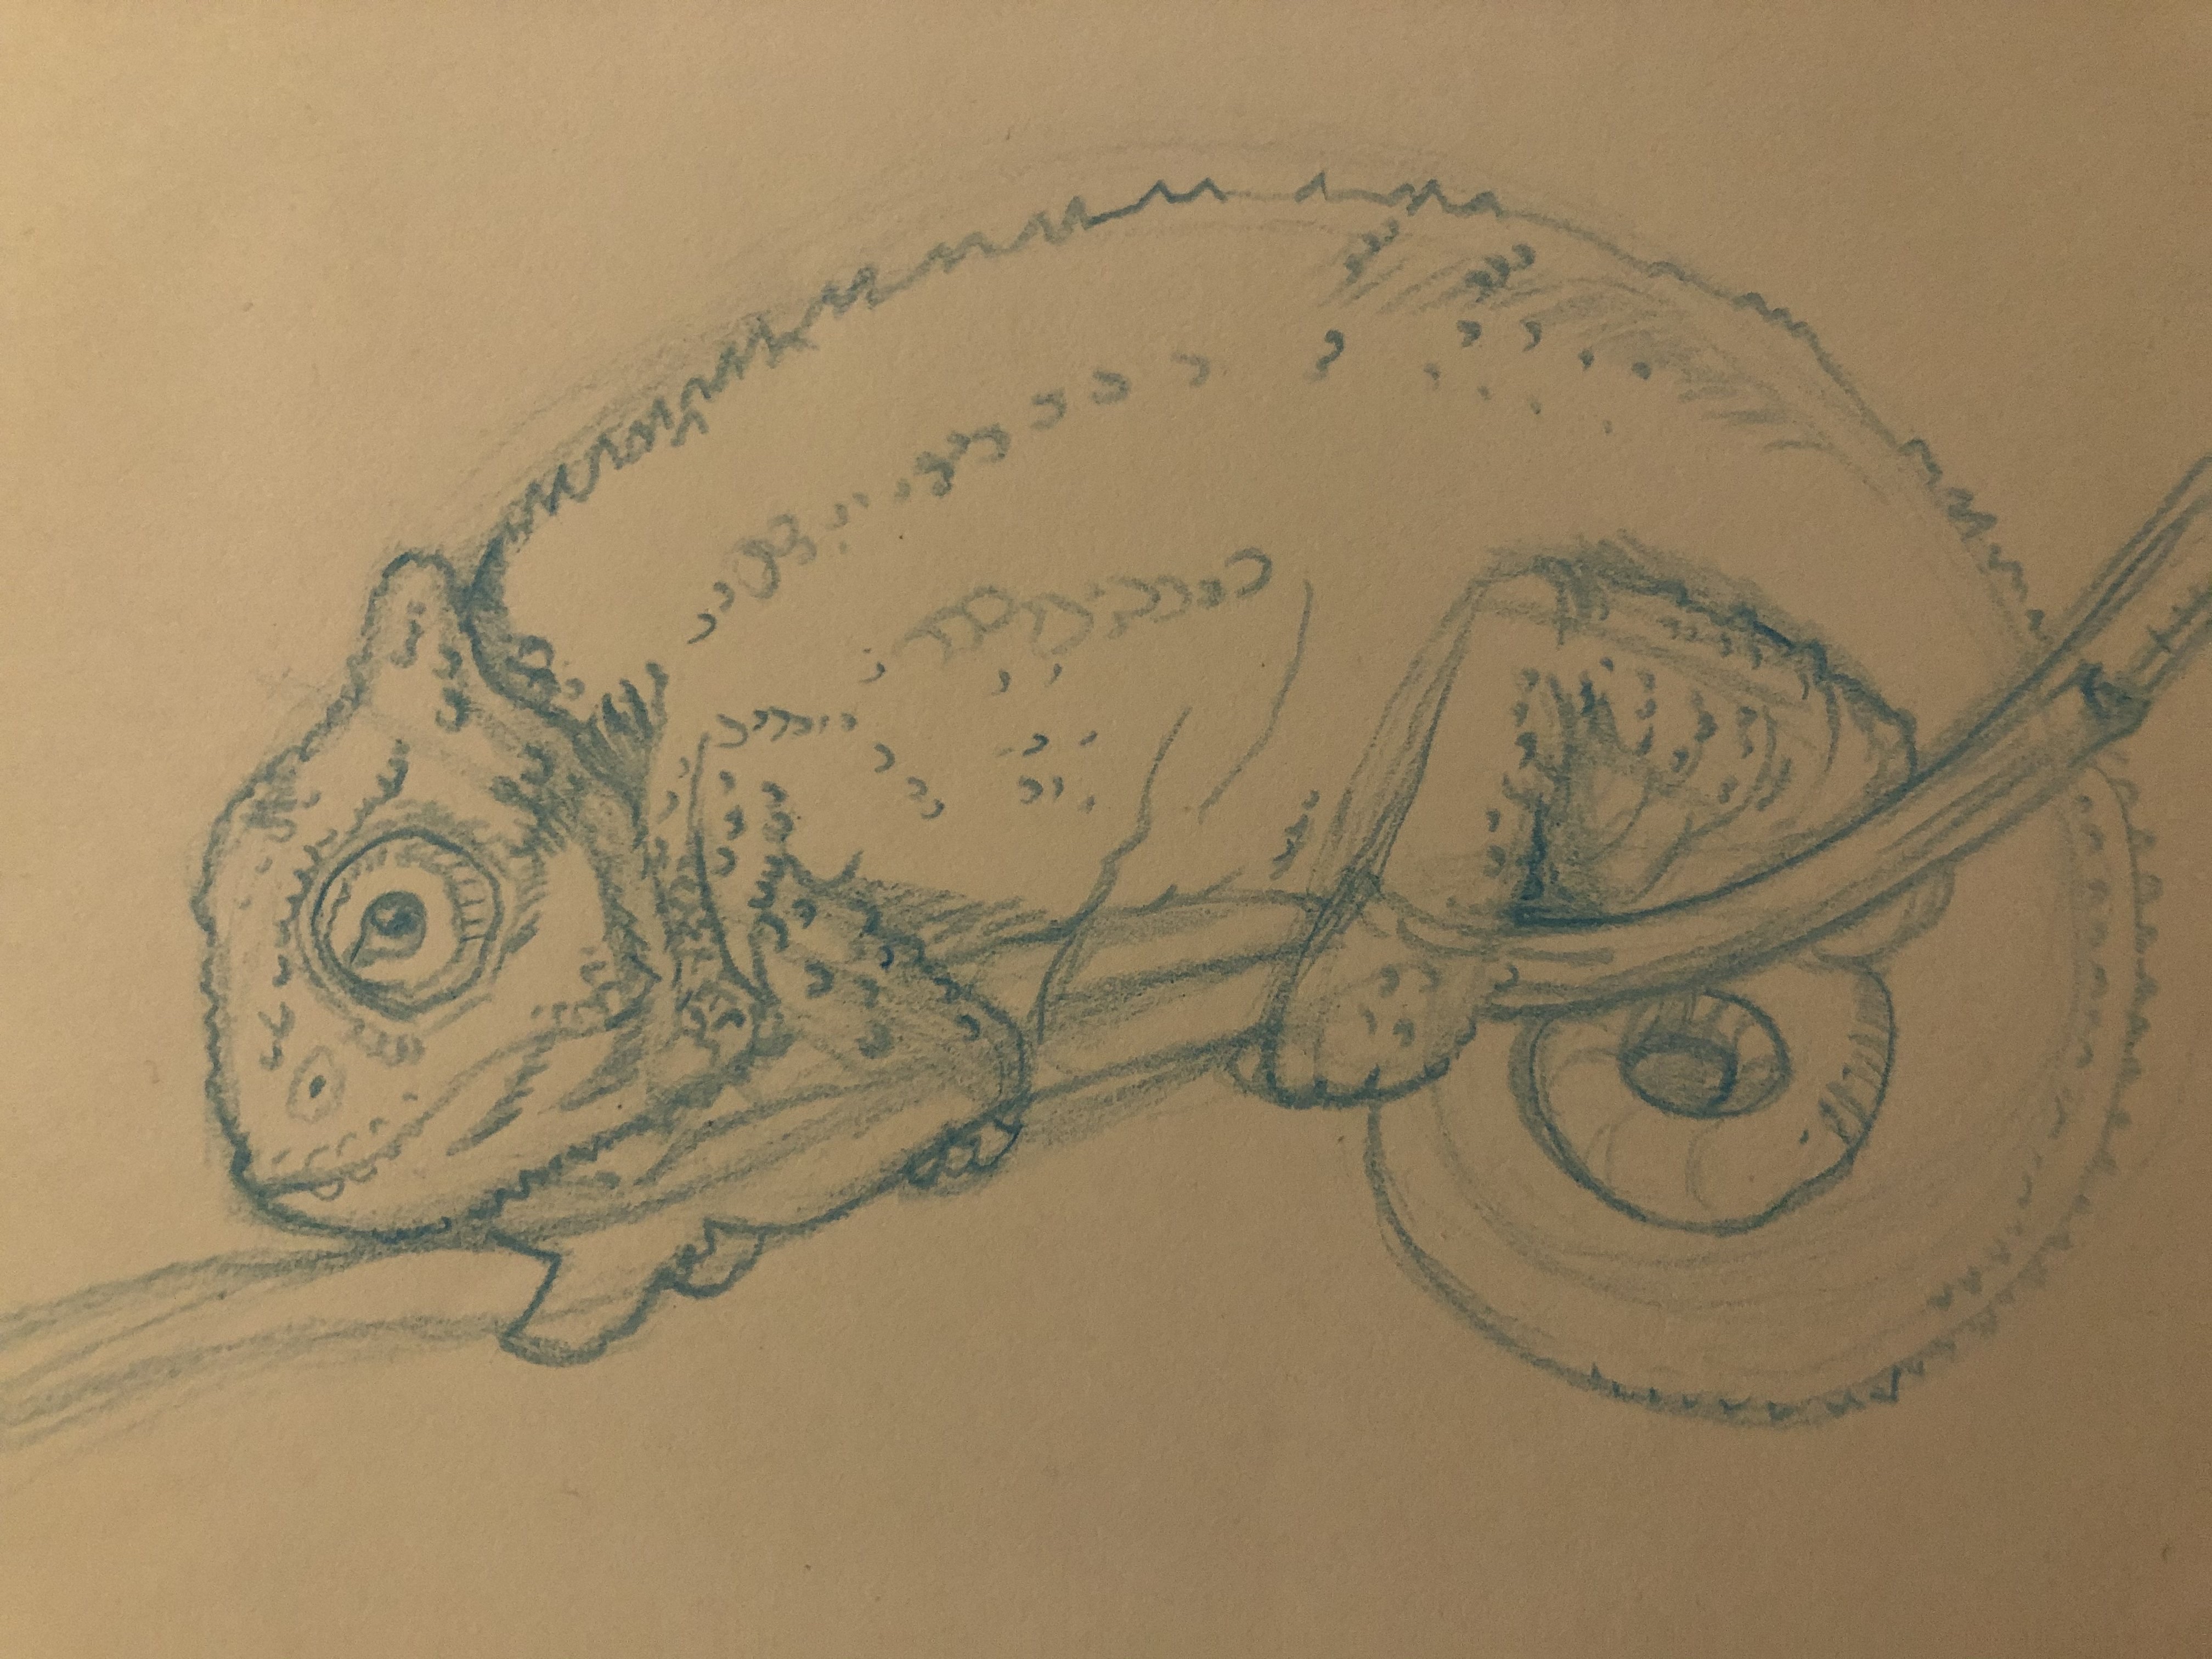 accent Picasso meteoor Pencil sketch of chameleon by WolfieAP on DeviantArt